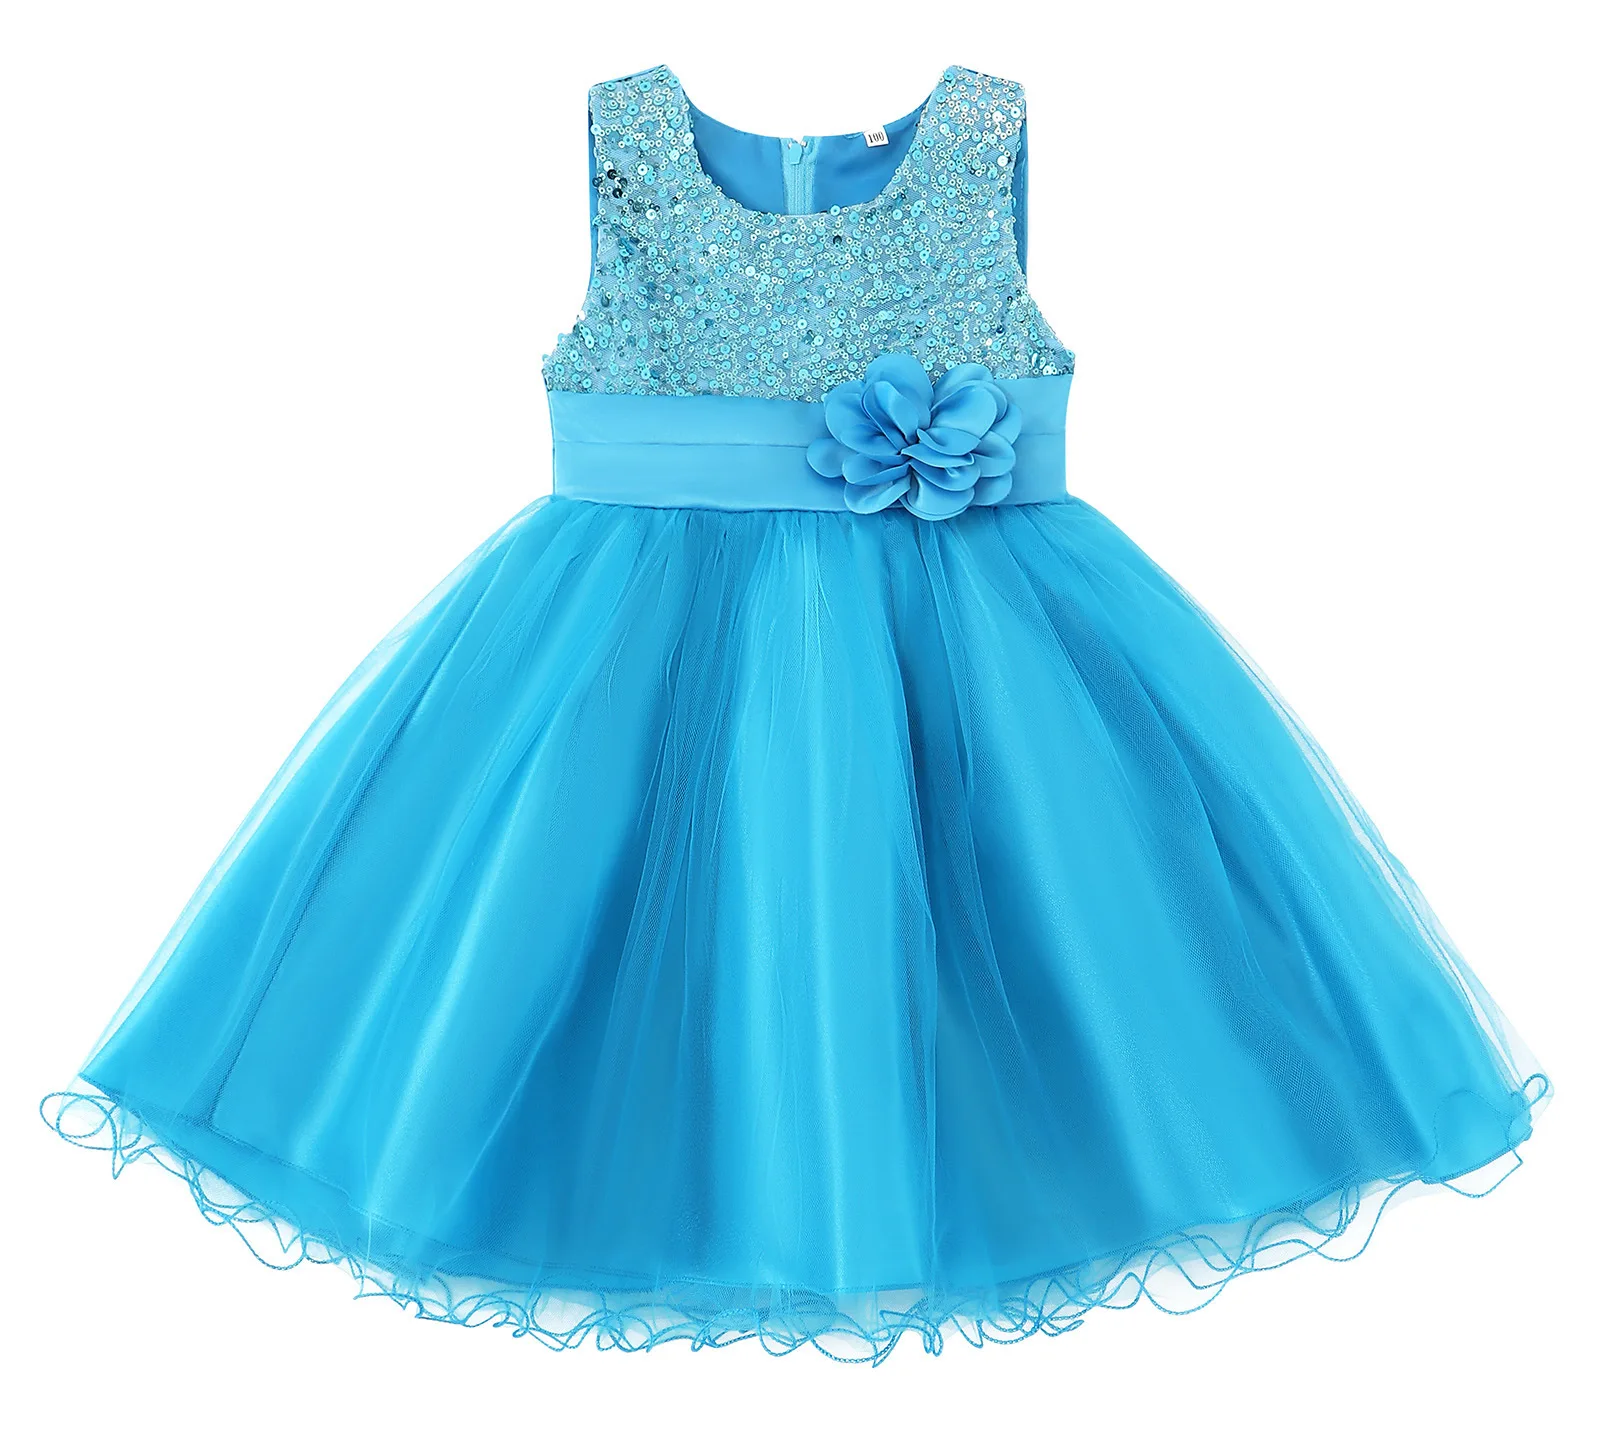 

Girl Sequins Dress Tulle with Flower Bow-knot Daily Mesh Skirts Flower Little Bridesmaid Princess Dresses for Wedding Party Kids